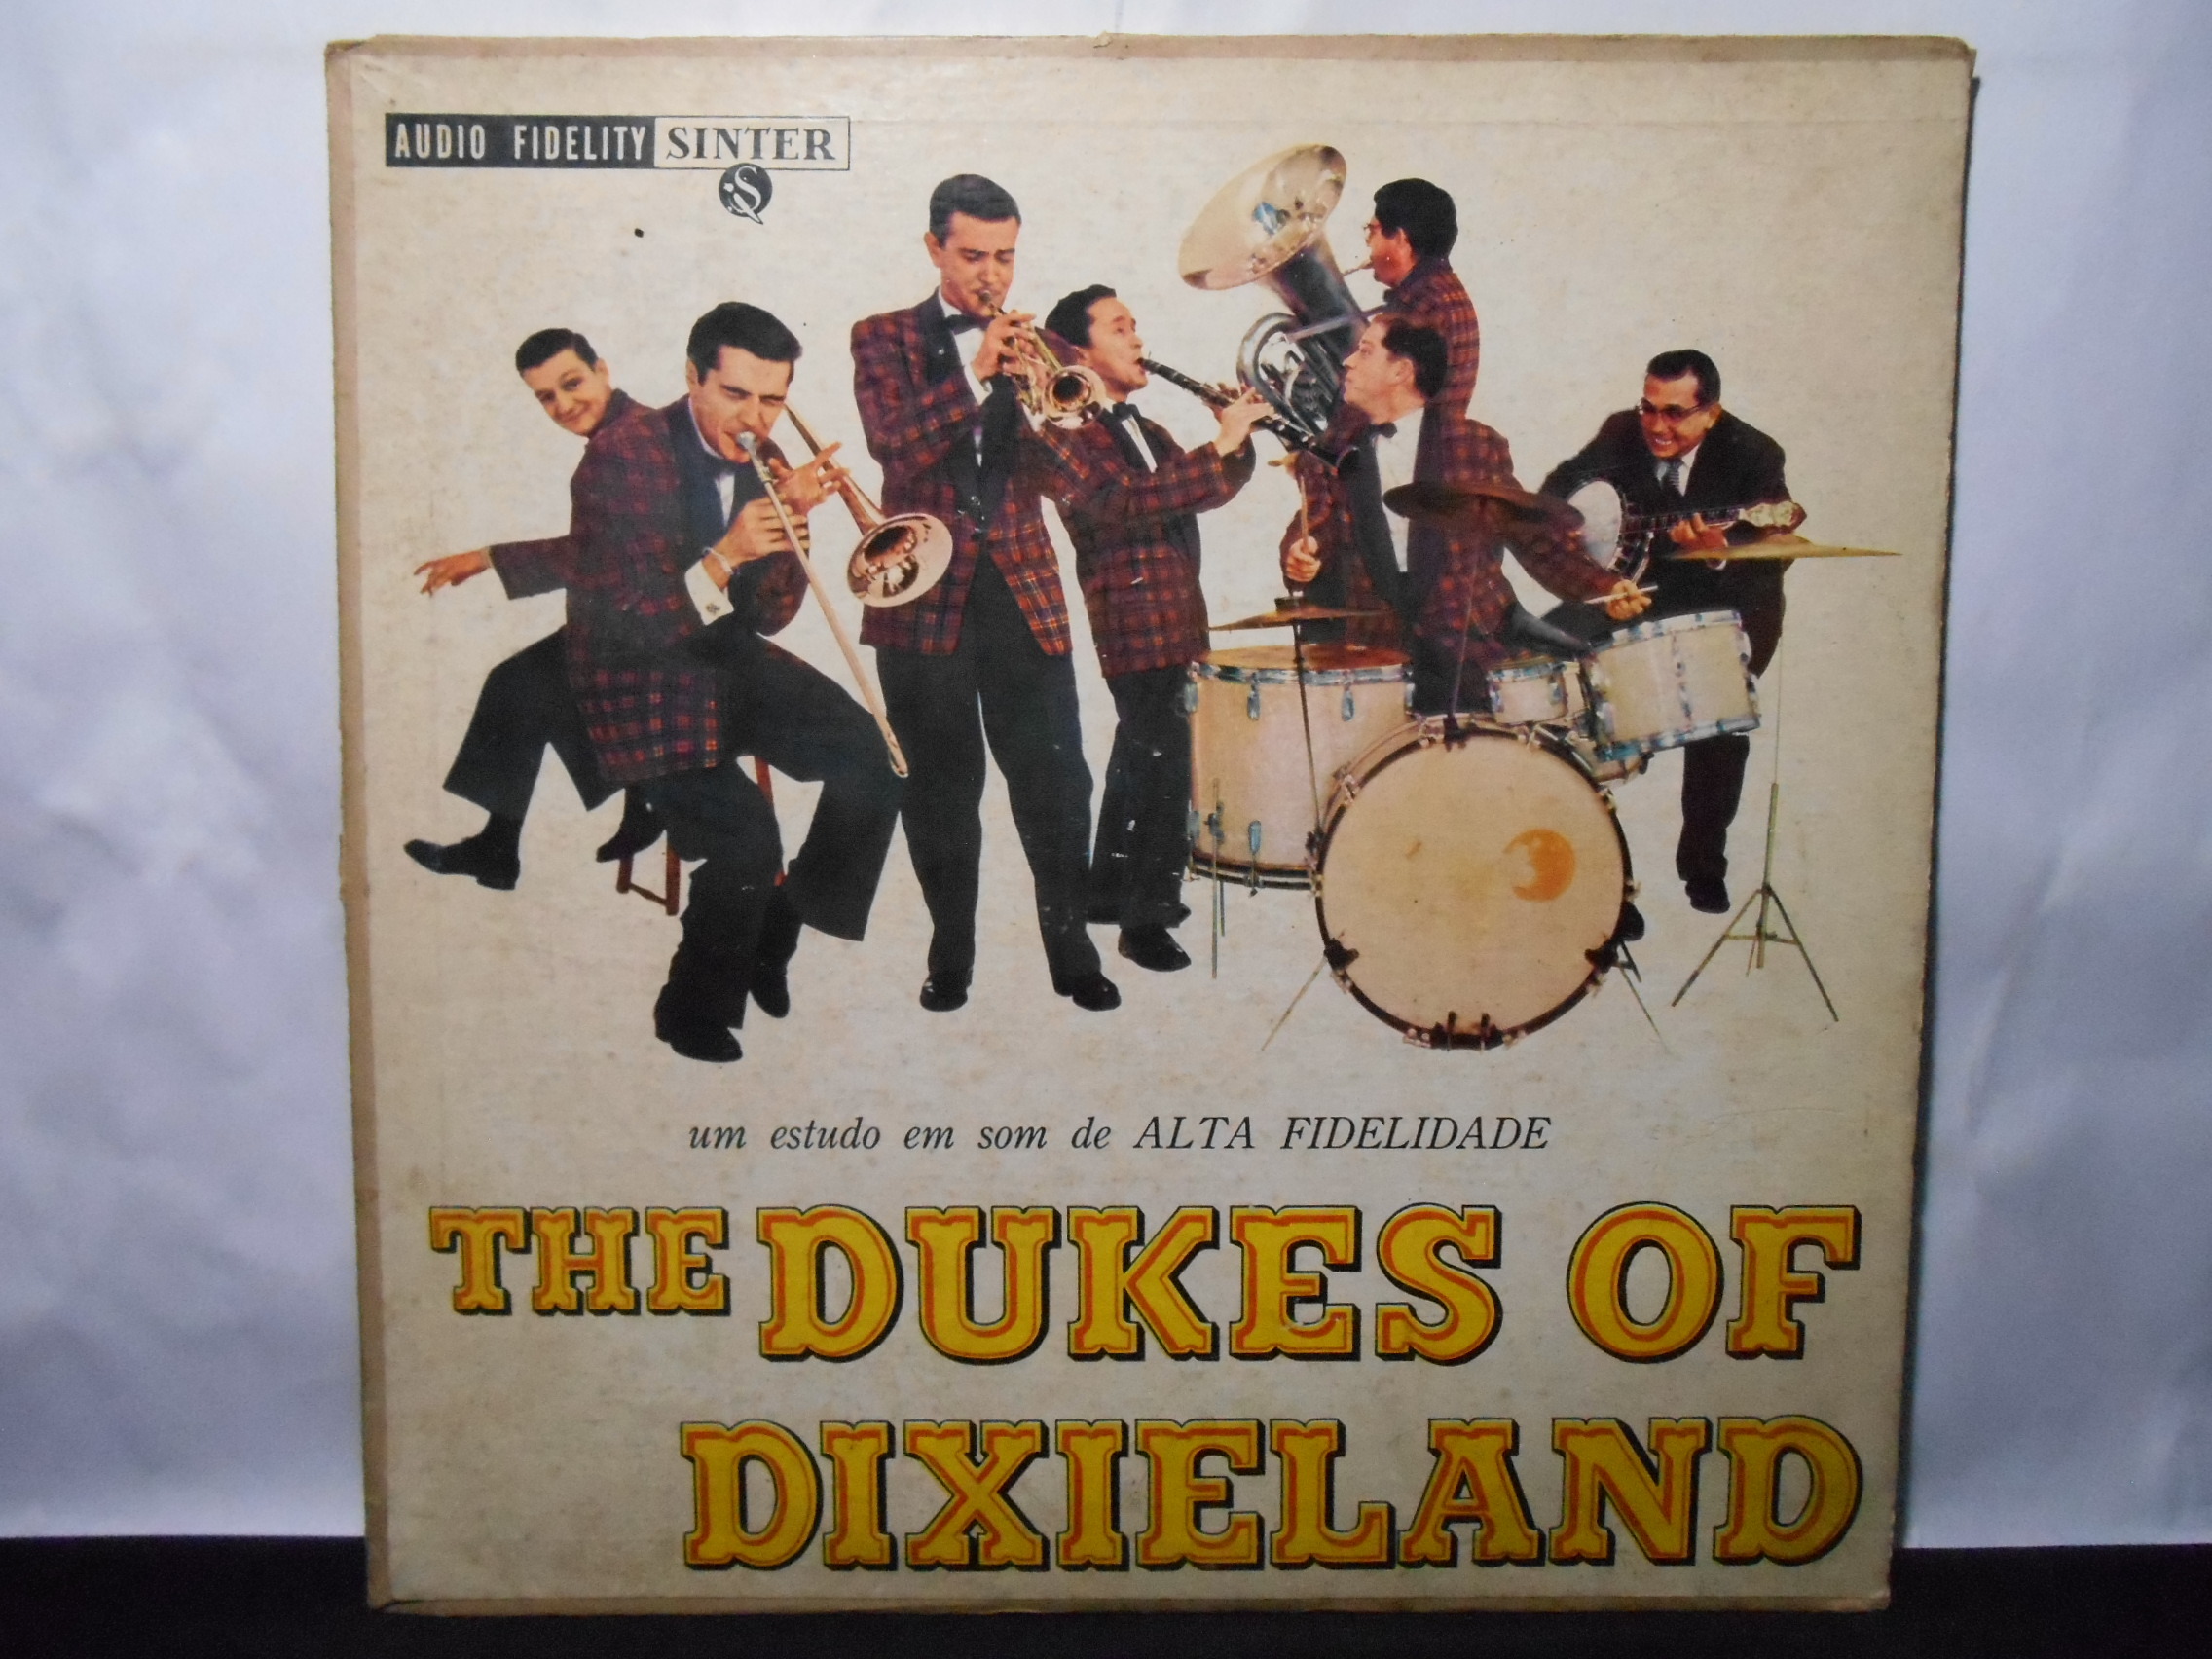 VINIL - The Dukes Of Dixieland - ...You Have To Hear It To Believe It!